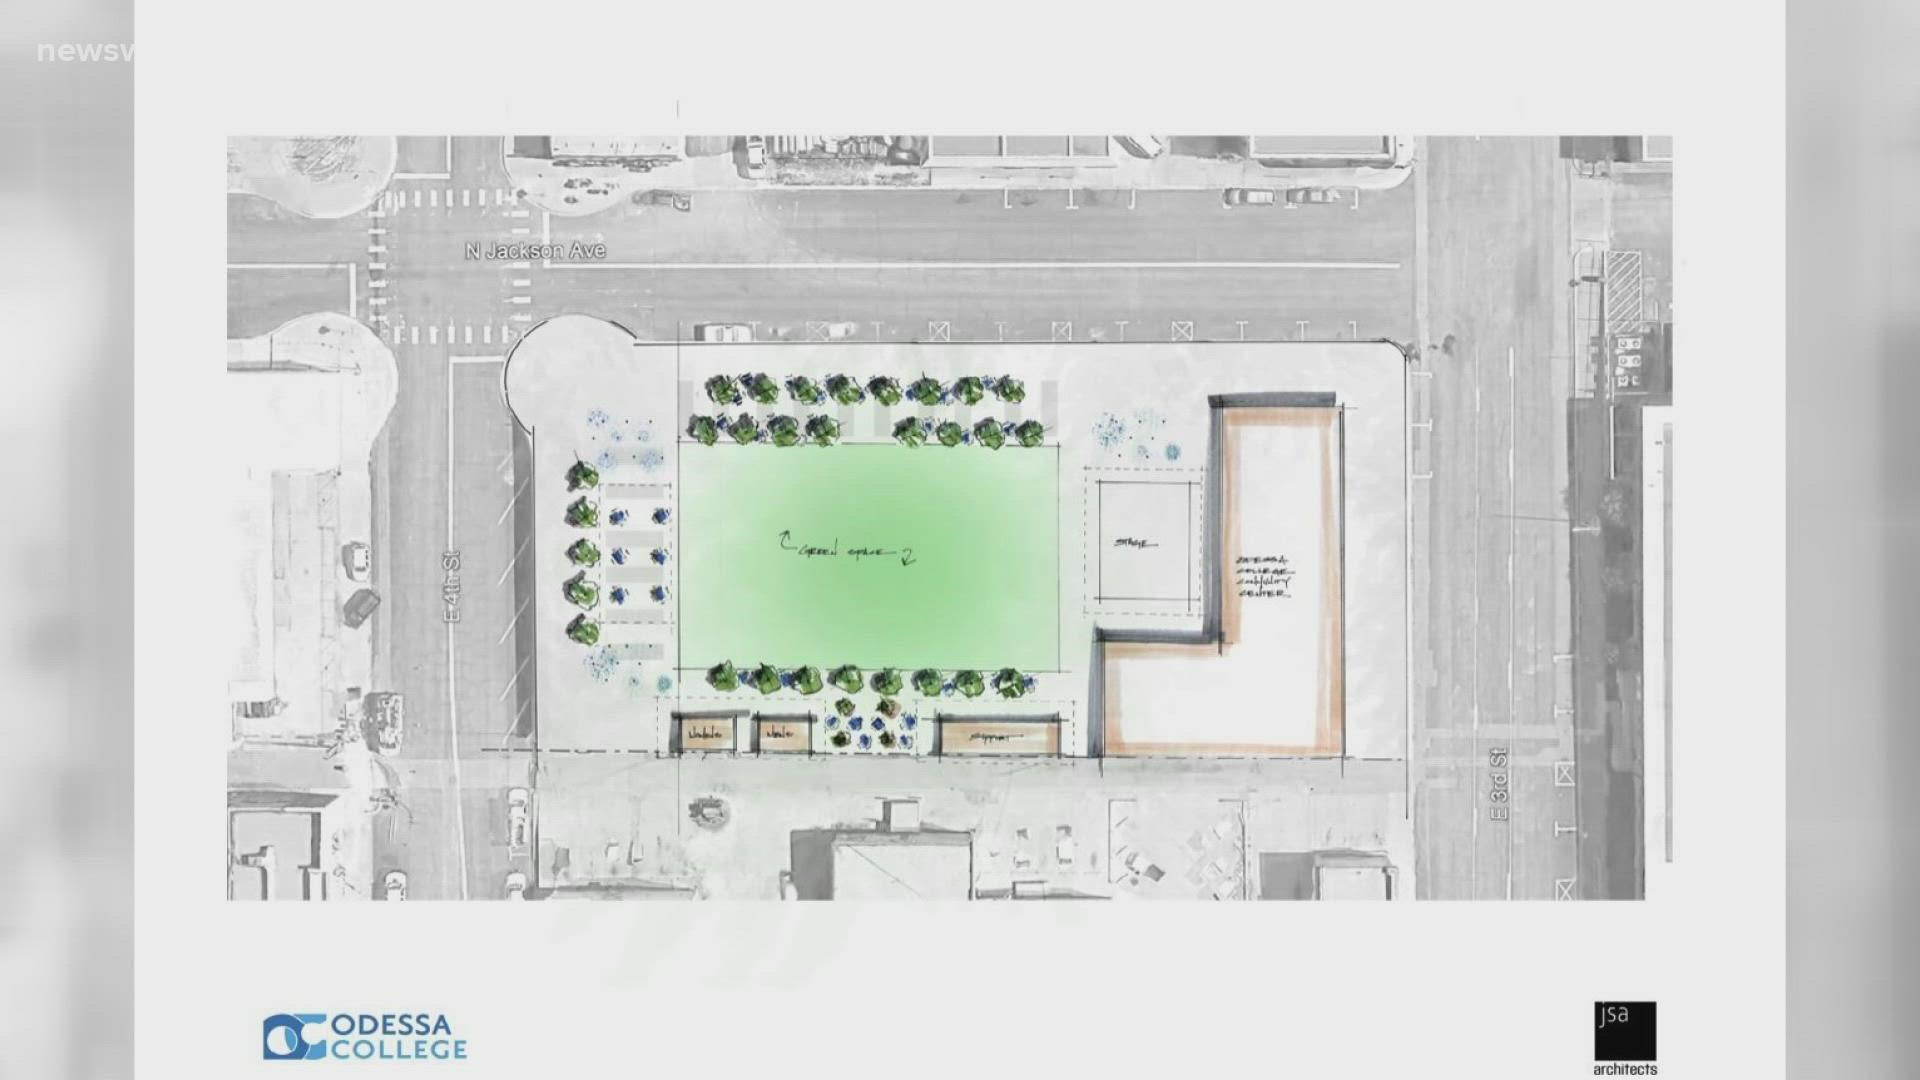 Odessa College plans to create a green space downtown and construct a stage area for community concerts and events